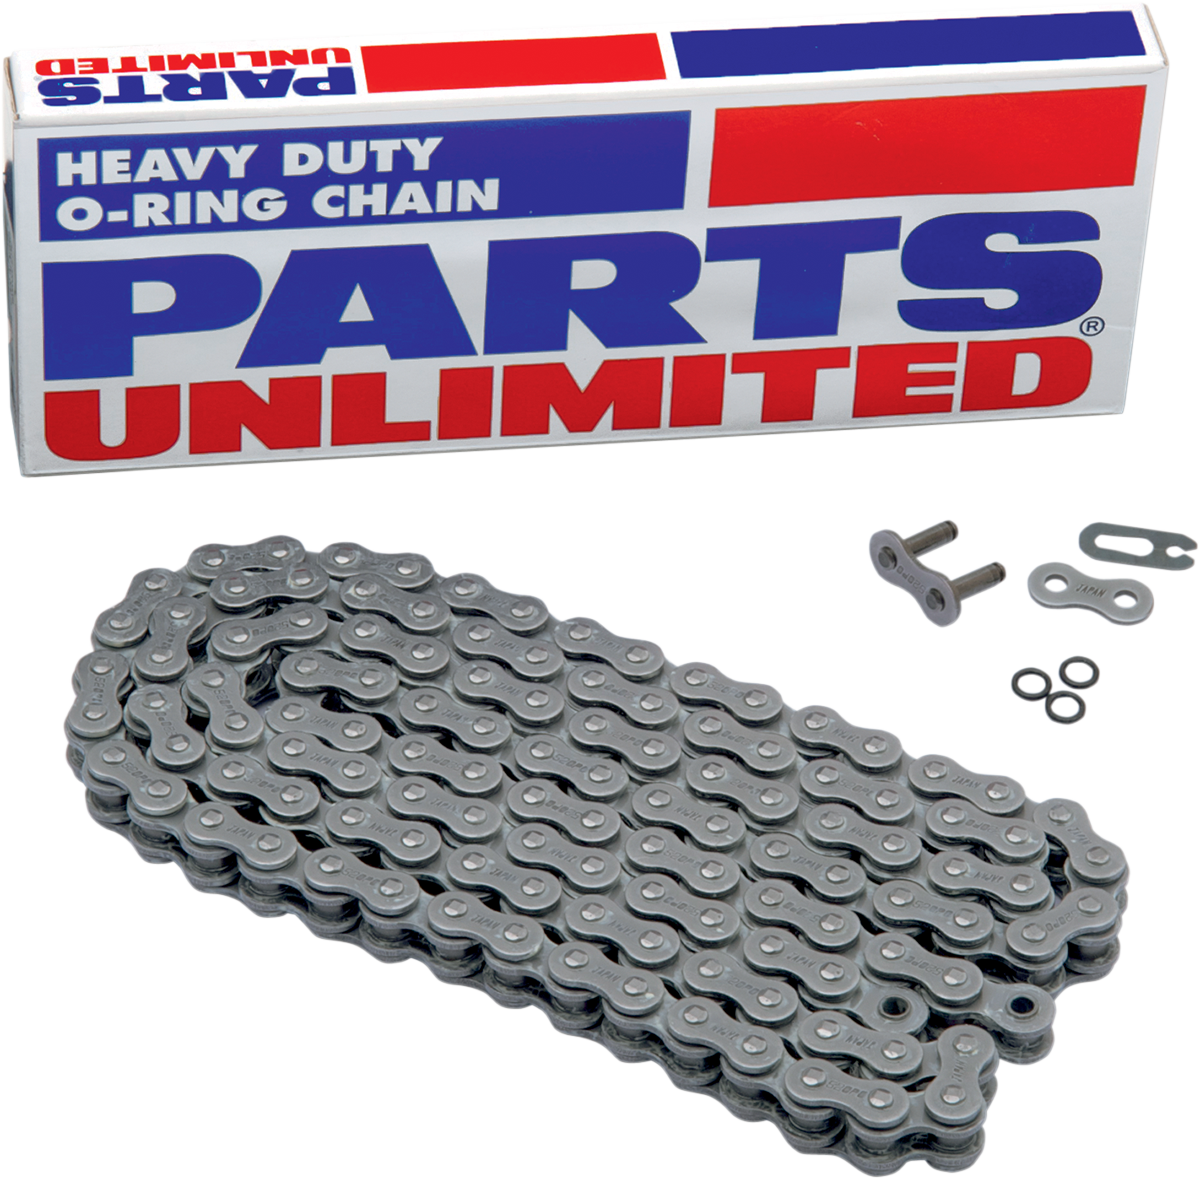 PARTS UNLIMITED-CHAIN MOTORCYCLE CHAIN CHAIN PU 520 O-RING X 86L